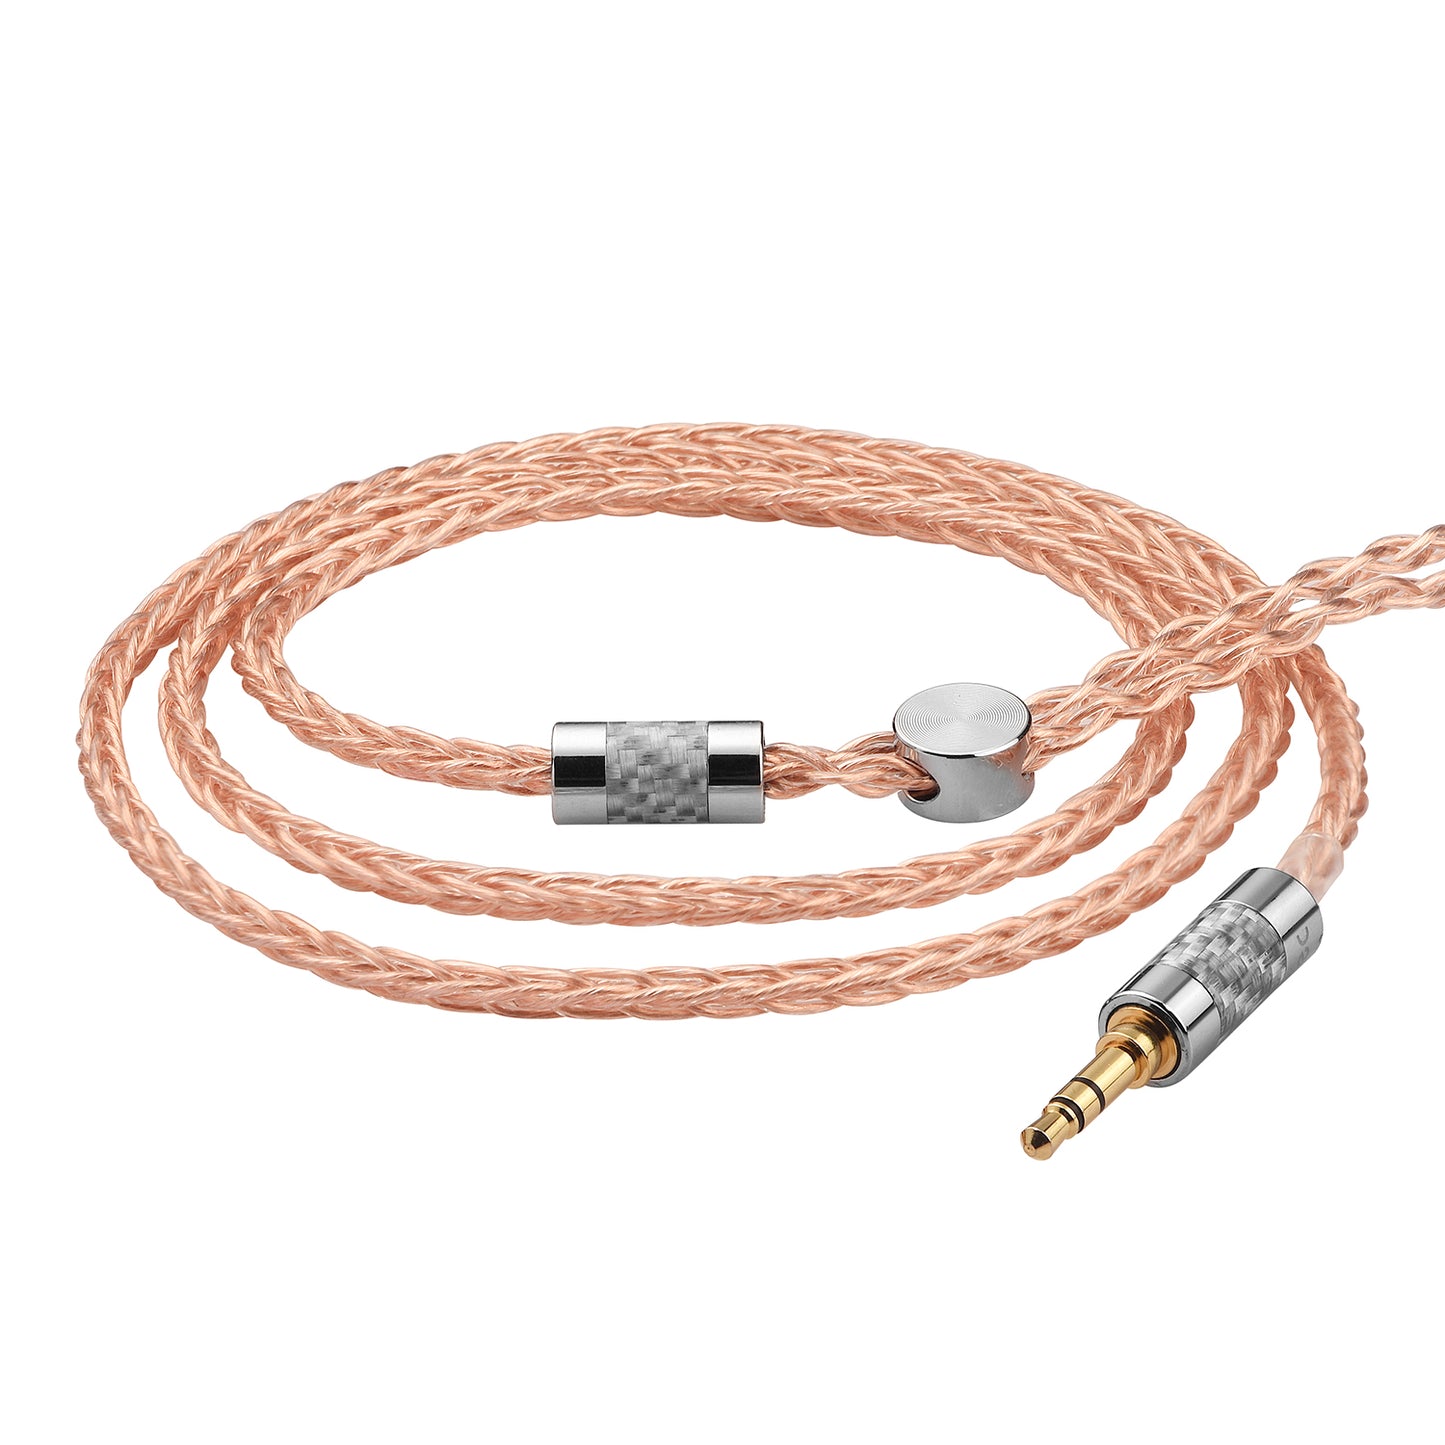 ATC5 / ATC6 6N OCC MMCX Cable